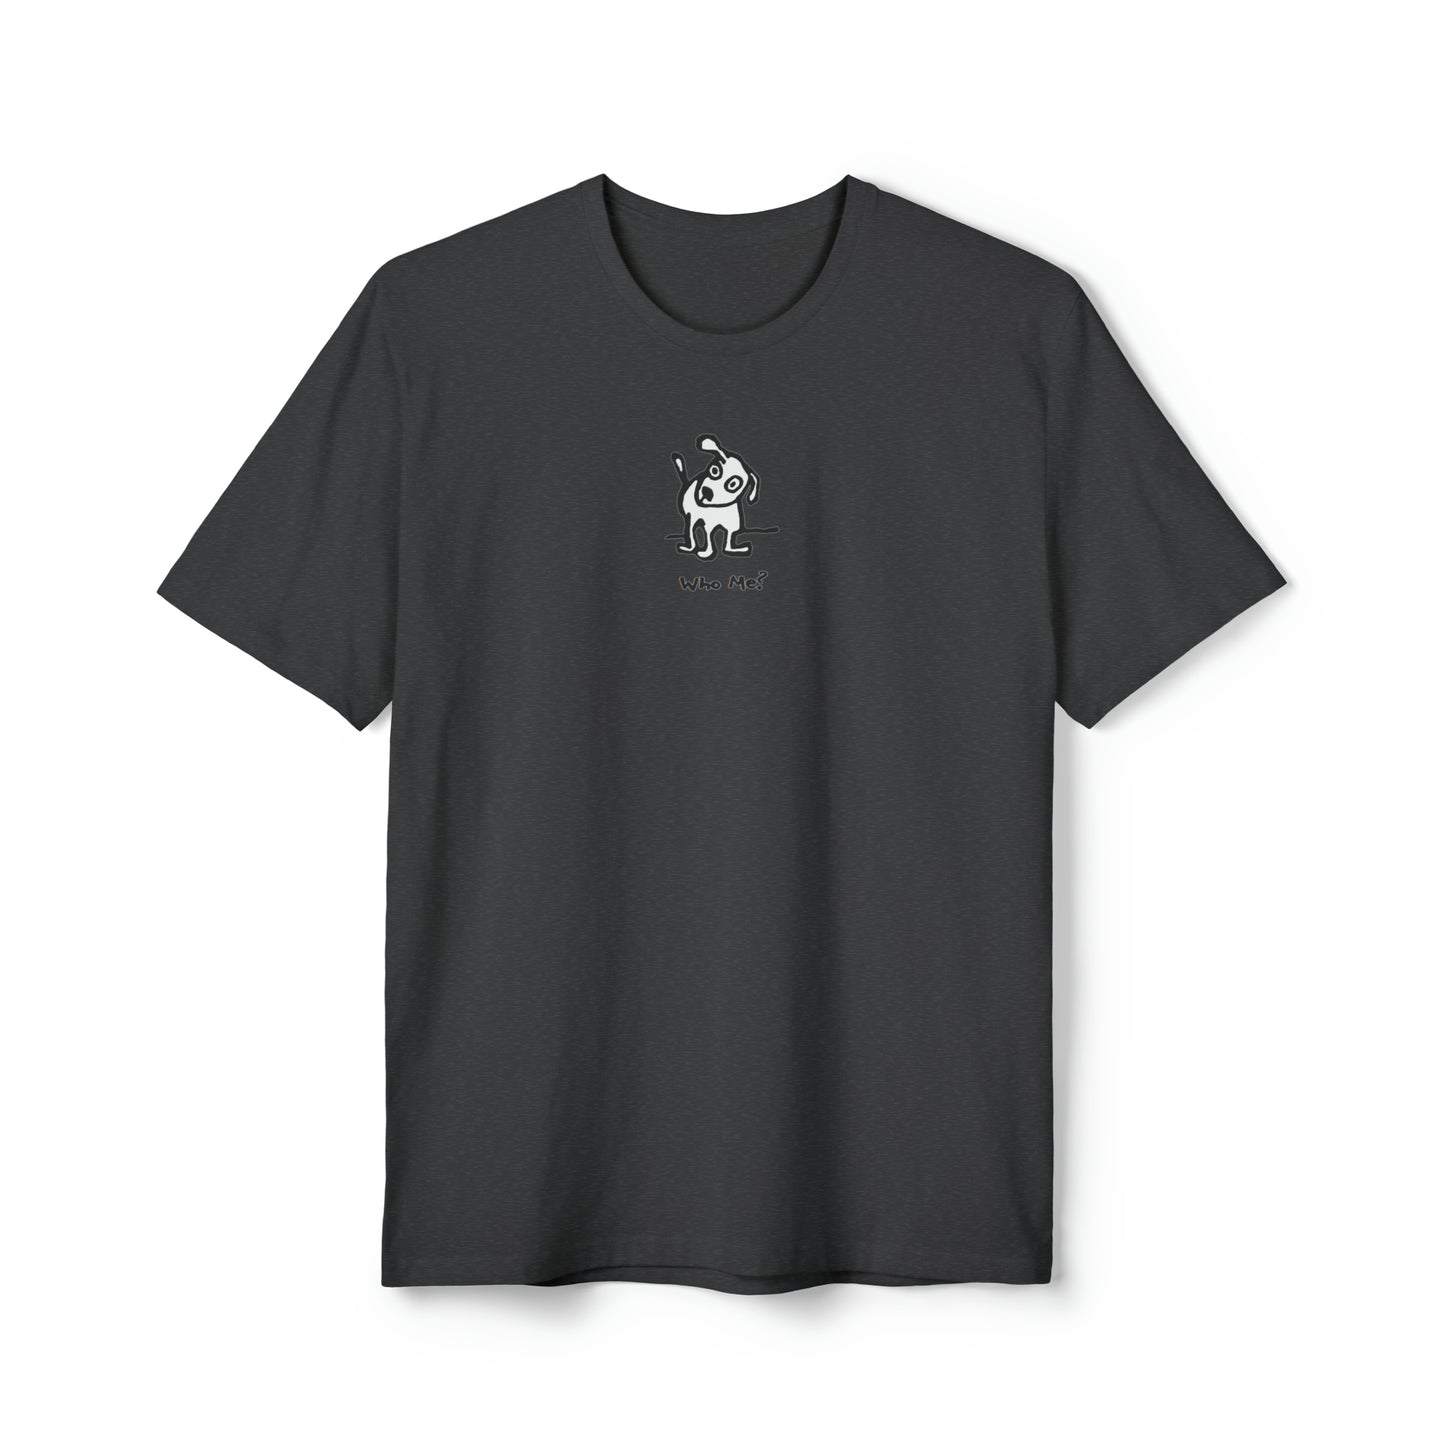 Black and white dog with head cocked to one side on charcoal heather color recycled unisex men's t-shirt. Text under image says Who Me?